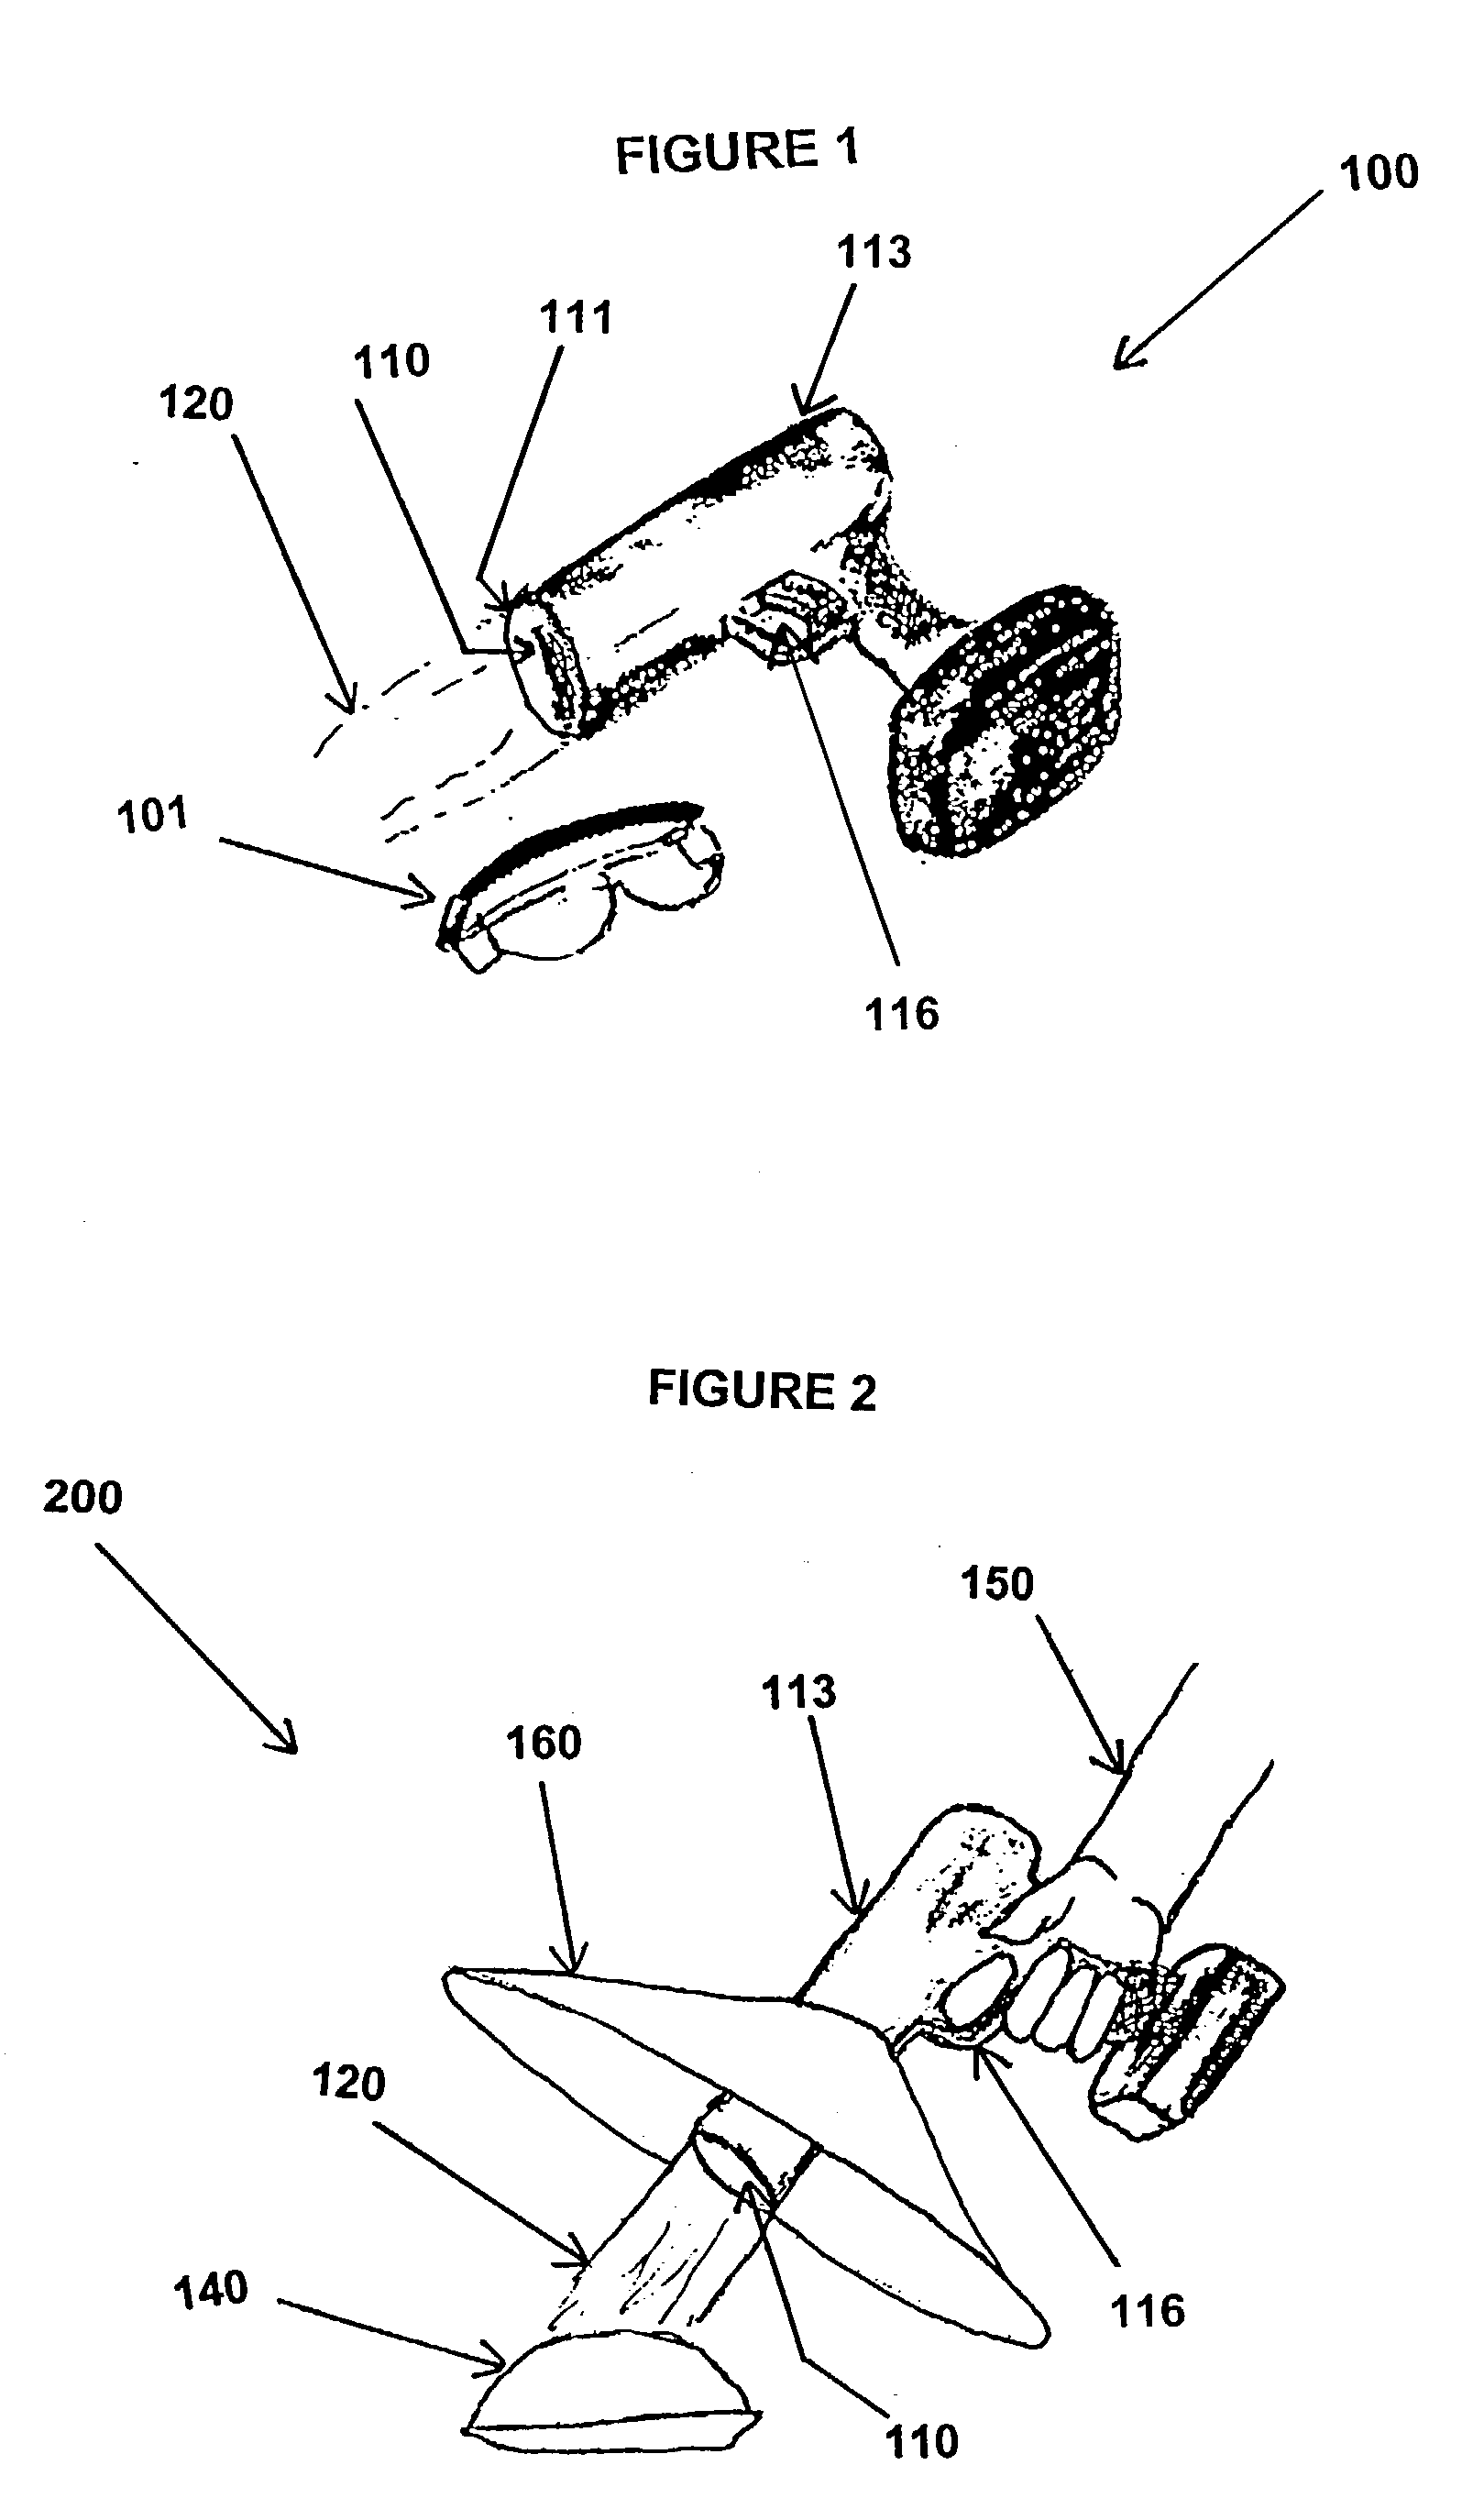 Apparatus and method for detecting fecal and ingesta contamination using a hand held illumination and imaging device